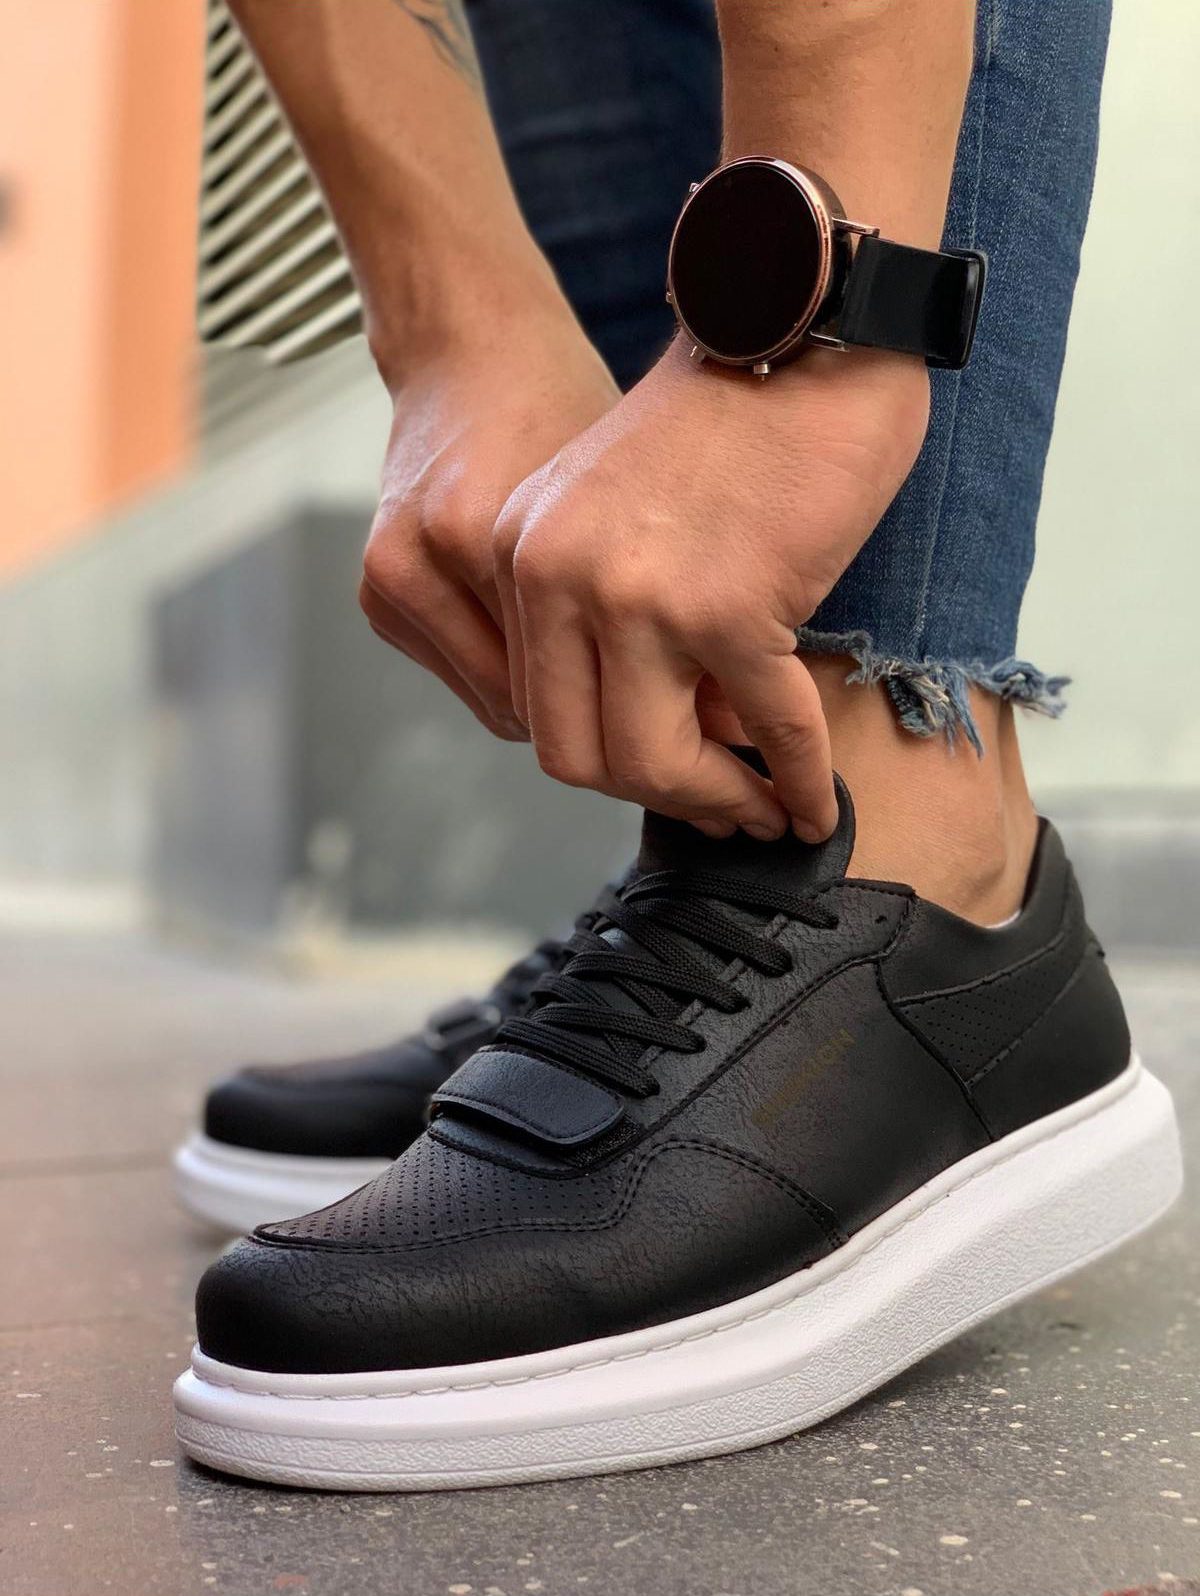 Chekich Men's Shoes Black Color Lace Up Artificial Leather Spring and Autumn Seasons Sneakers Casual Breathable Vulcanized Lightweight Velcro Band Odorless Comfortable Suits Office White High Sole CH073 V6